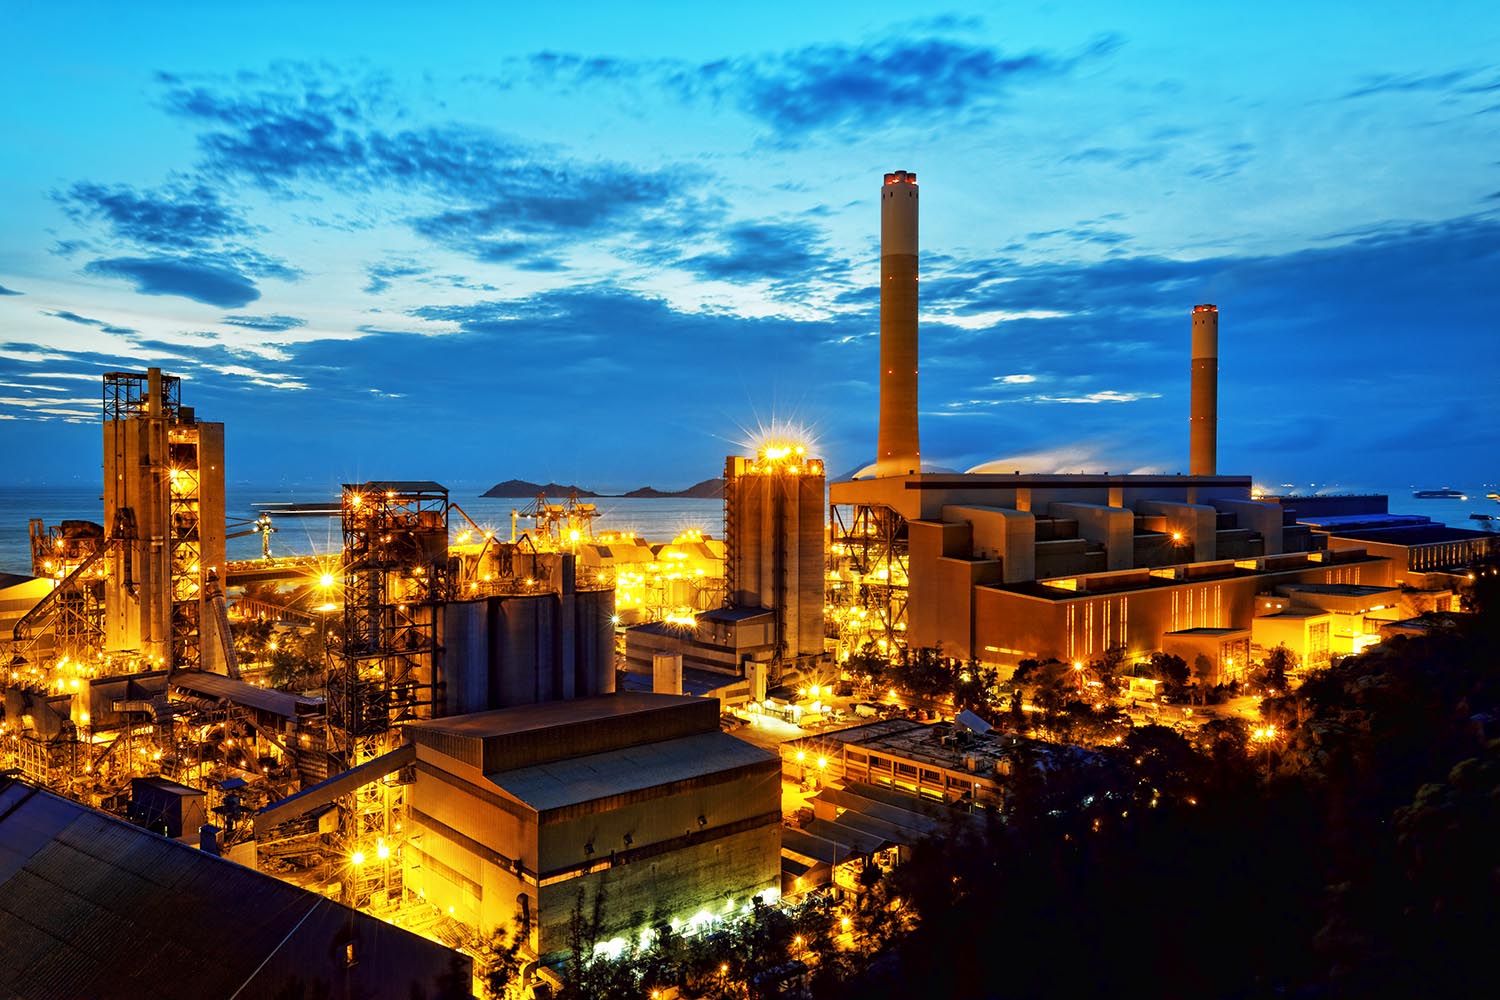 Sulzer’s expertise in rotating equipment retrofits and abrasive services has helped a Philippines petrochemical plant solve a persistent reliability issue and prepare for a 64% increase in capacity.